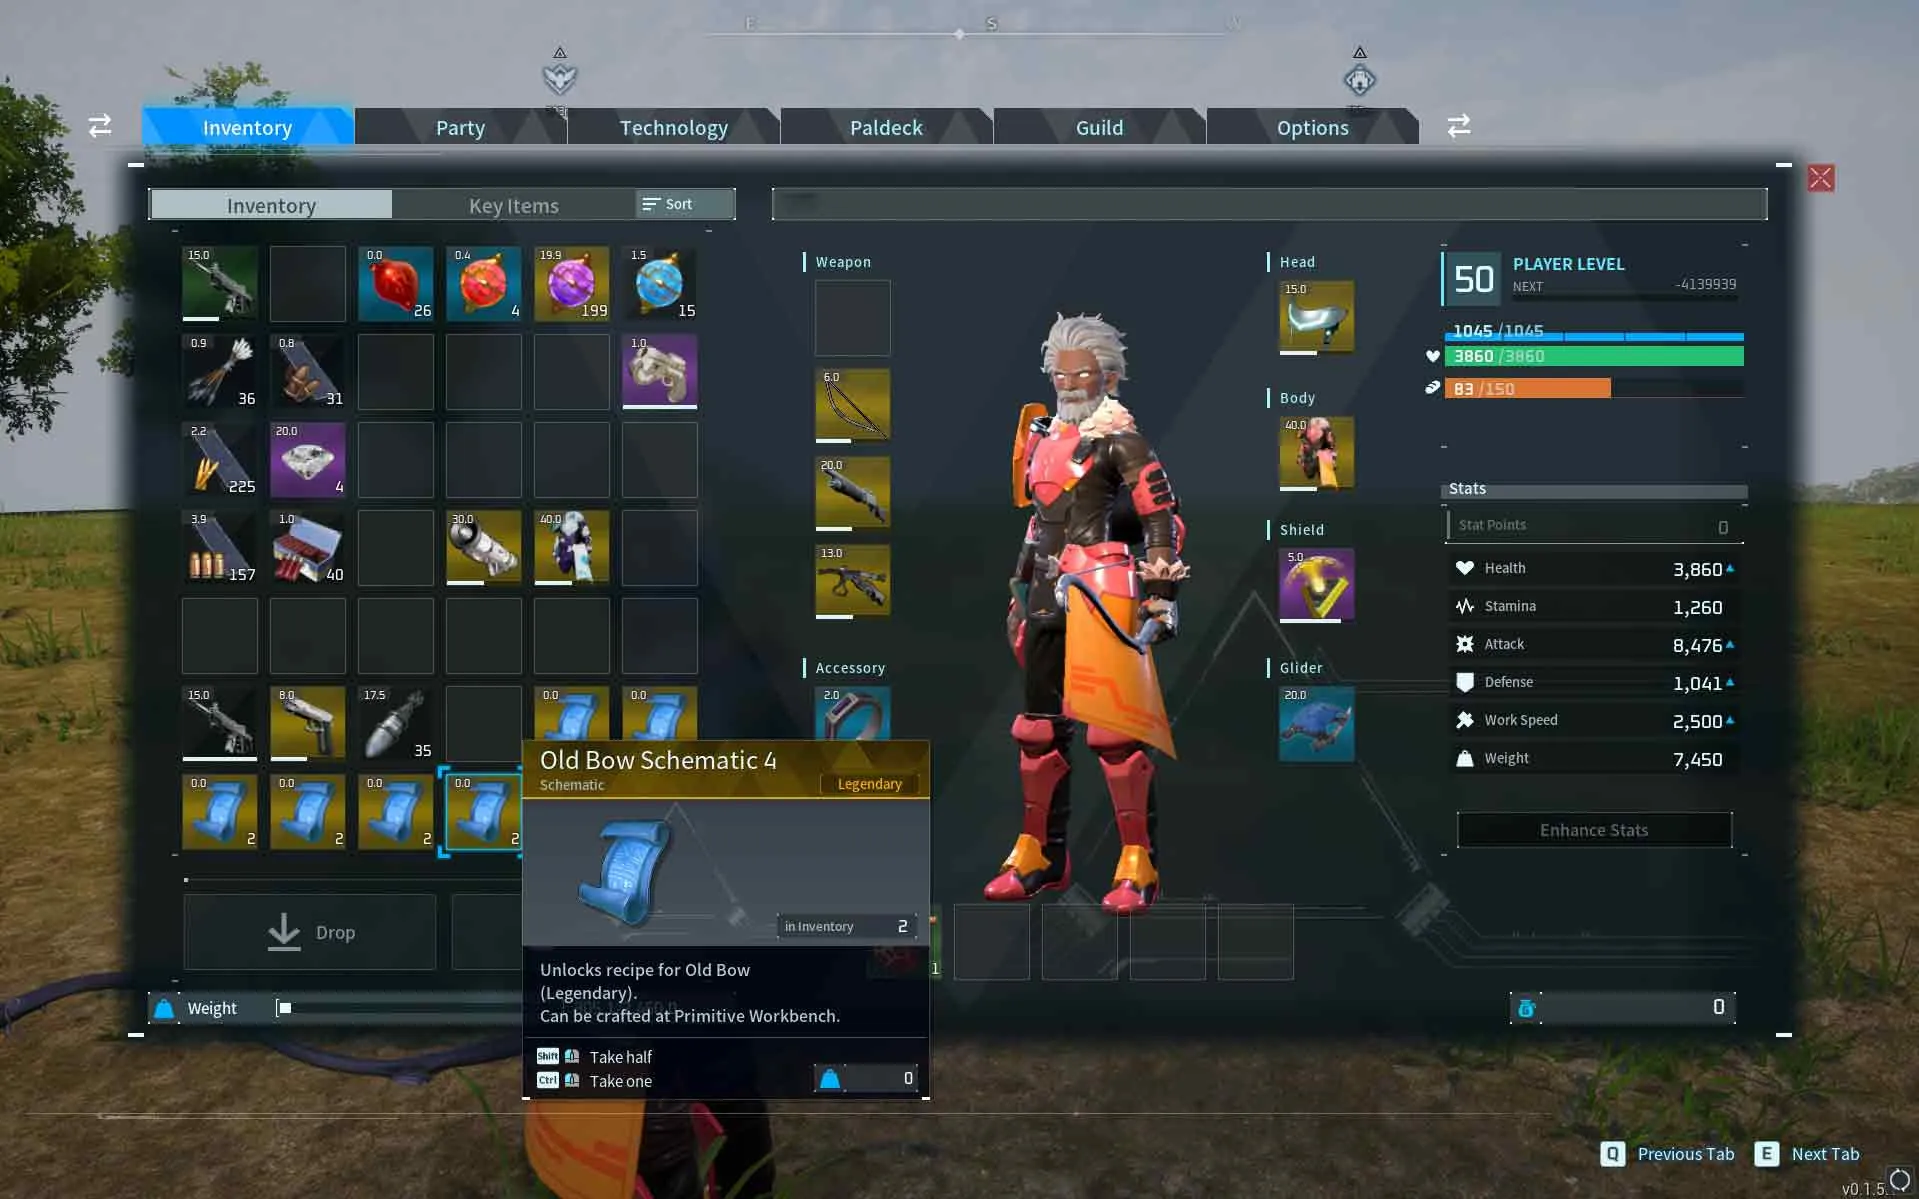 A player’s inventory having the Legendary Old Bow Scheamtic in palworld